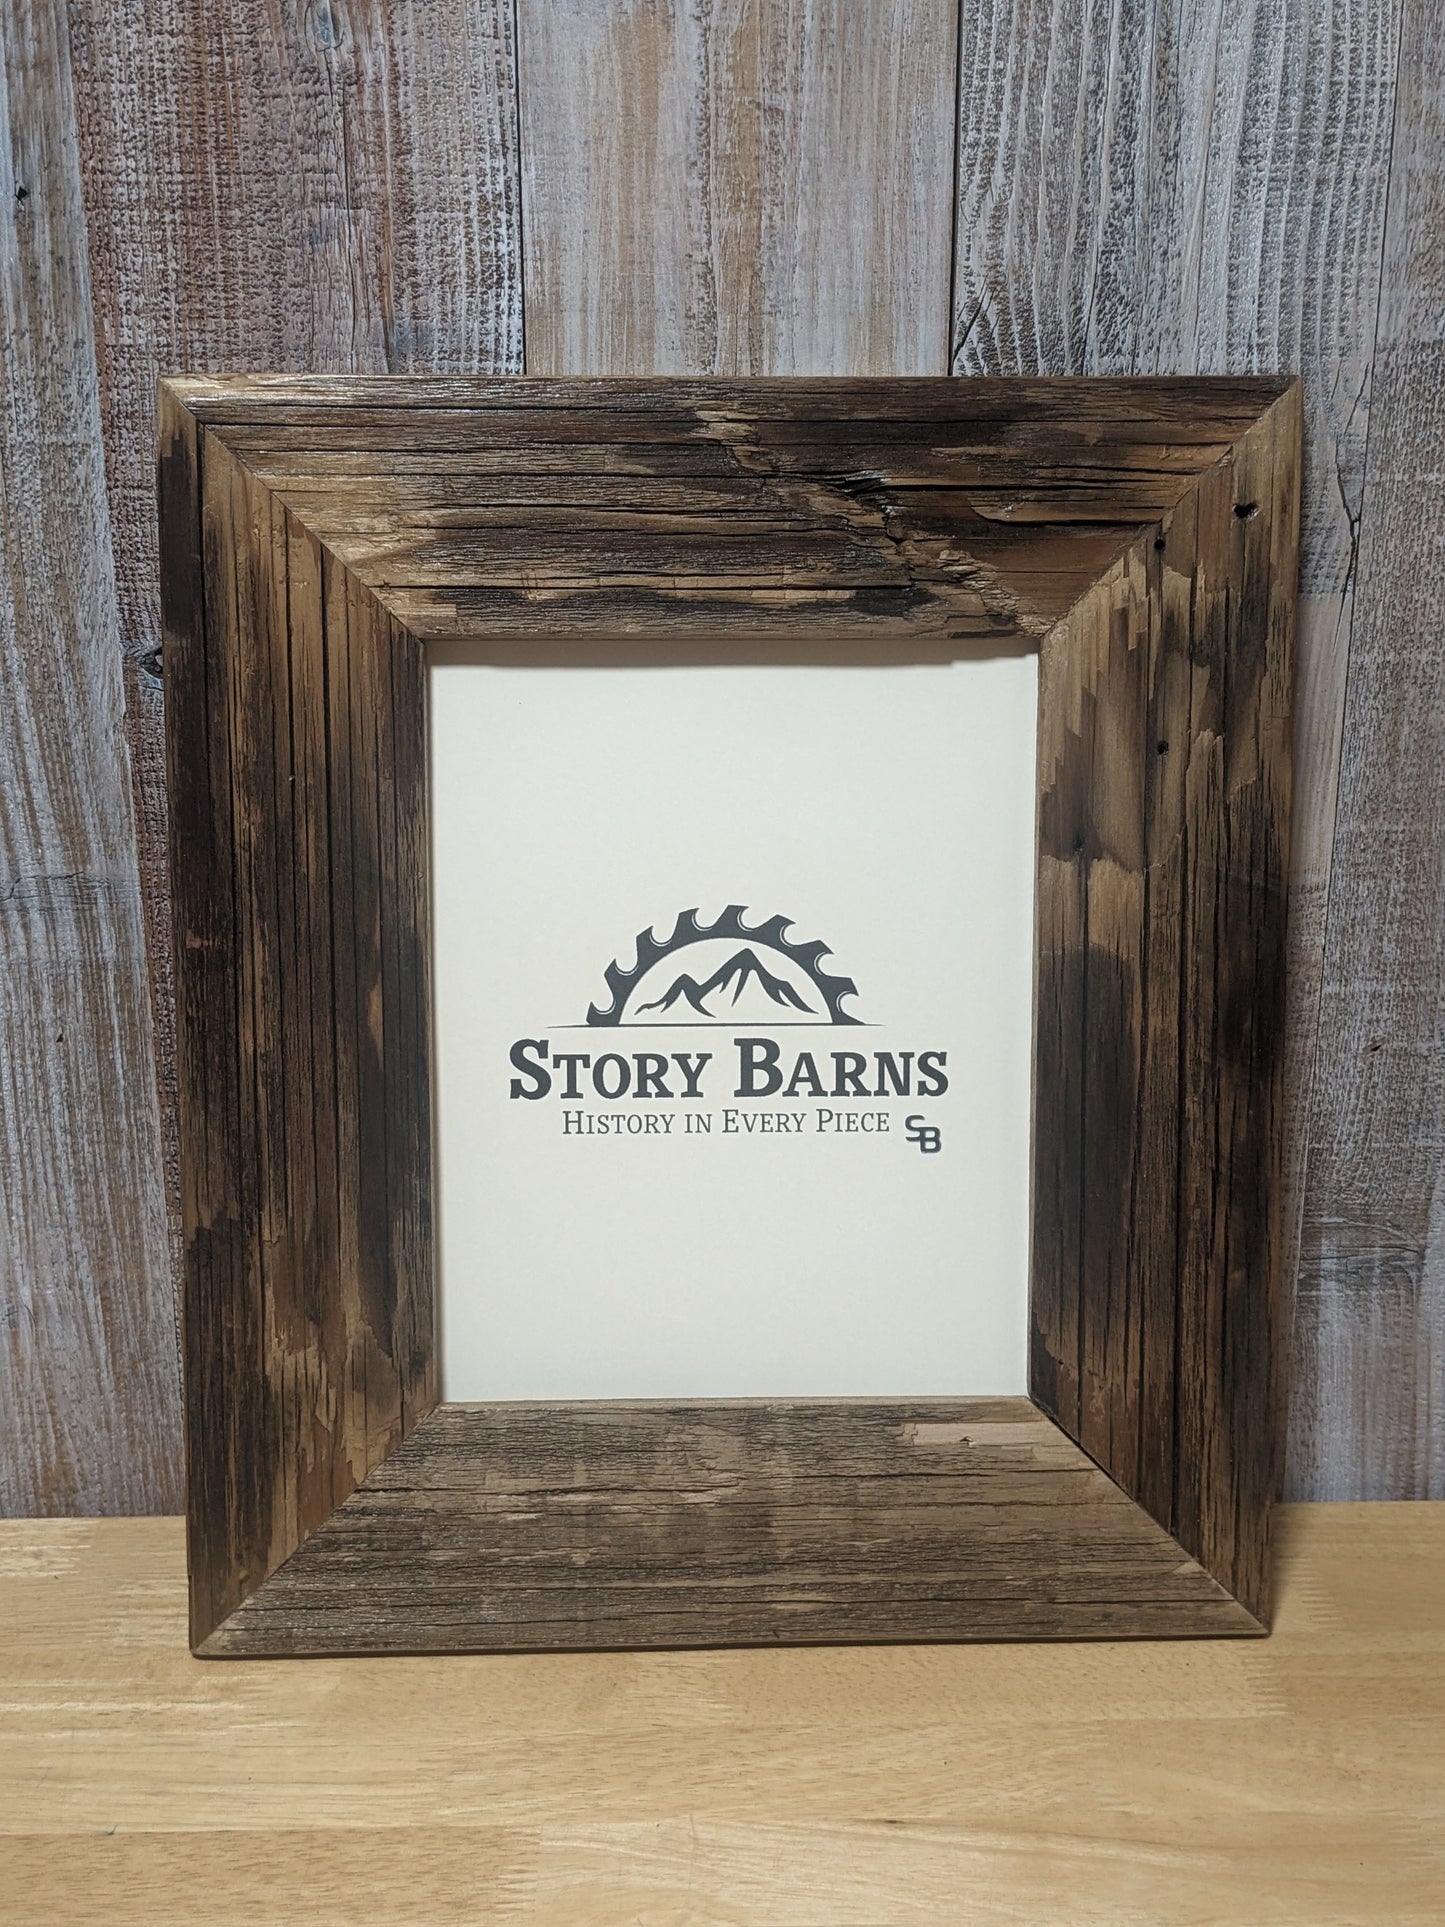 8x10 Picture Frame